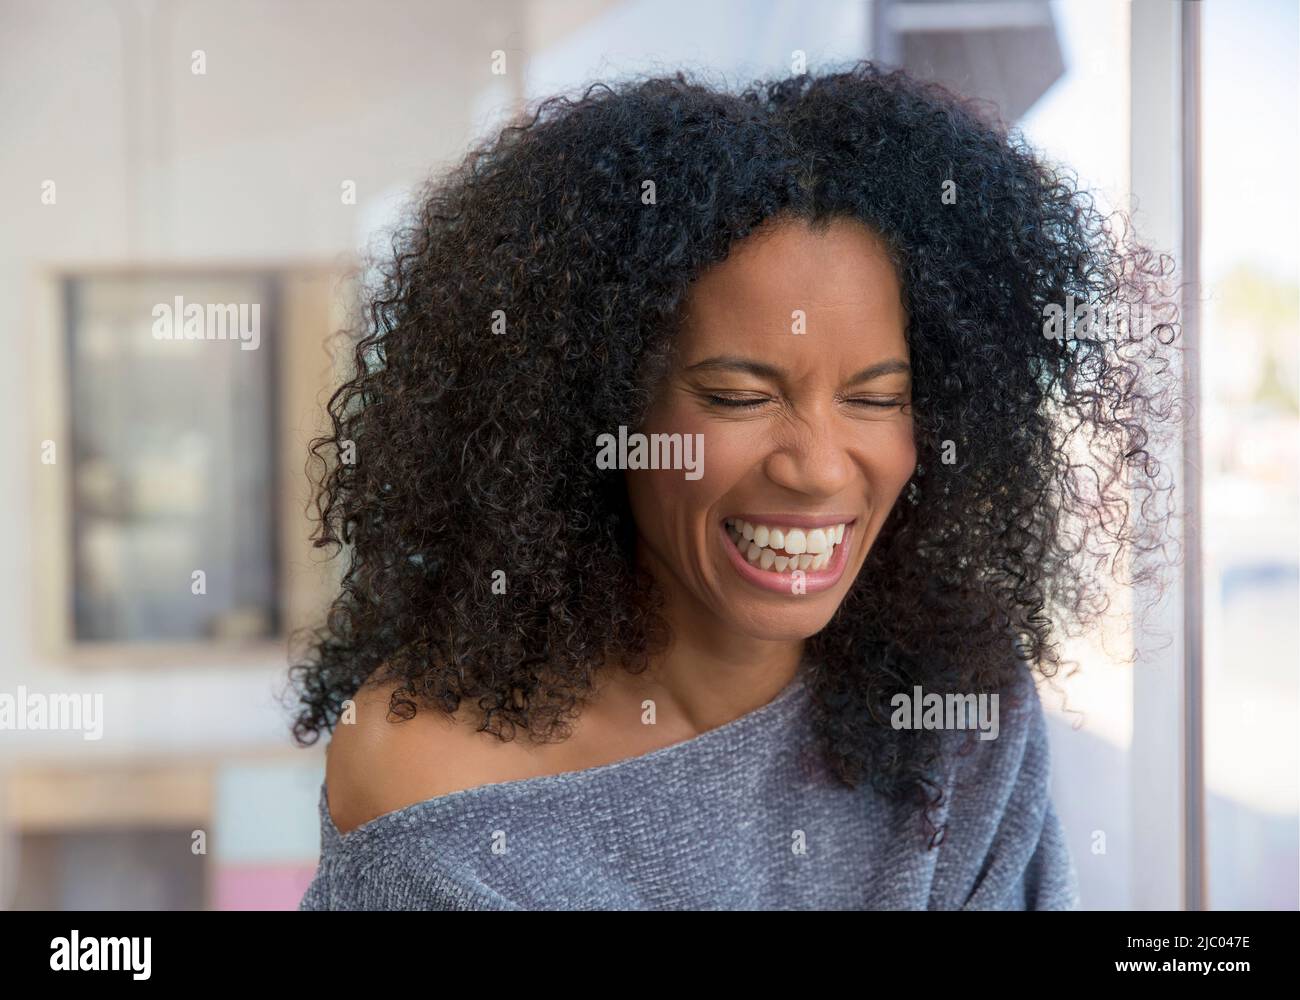 Mixed race, middle-aged woman laughing in a brightly lit room. Stock Photo